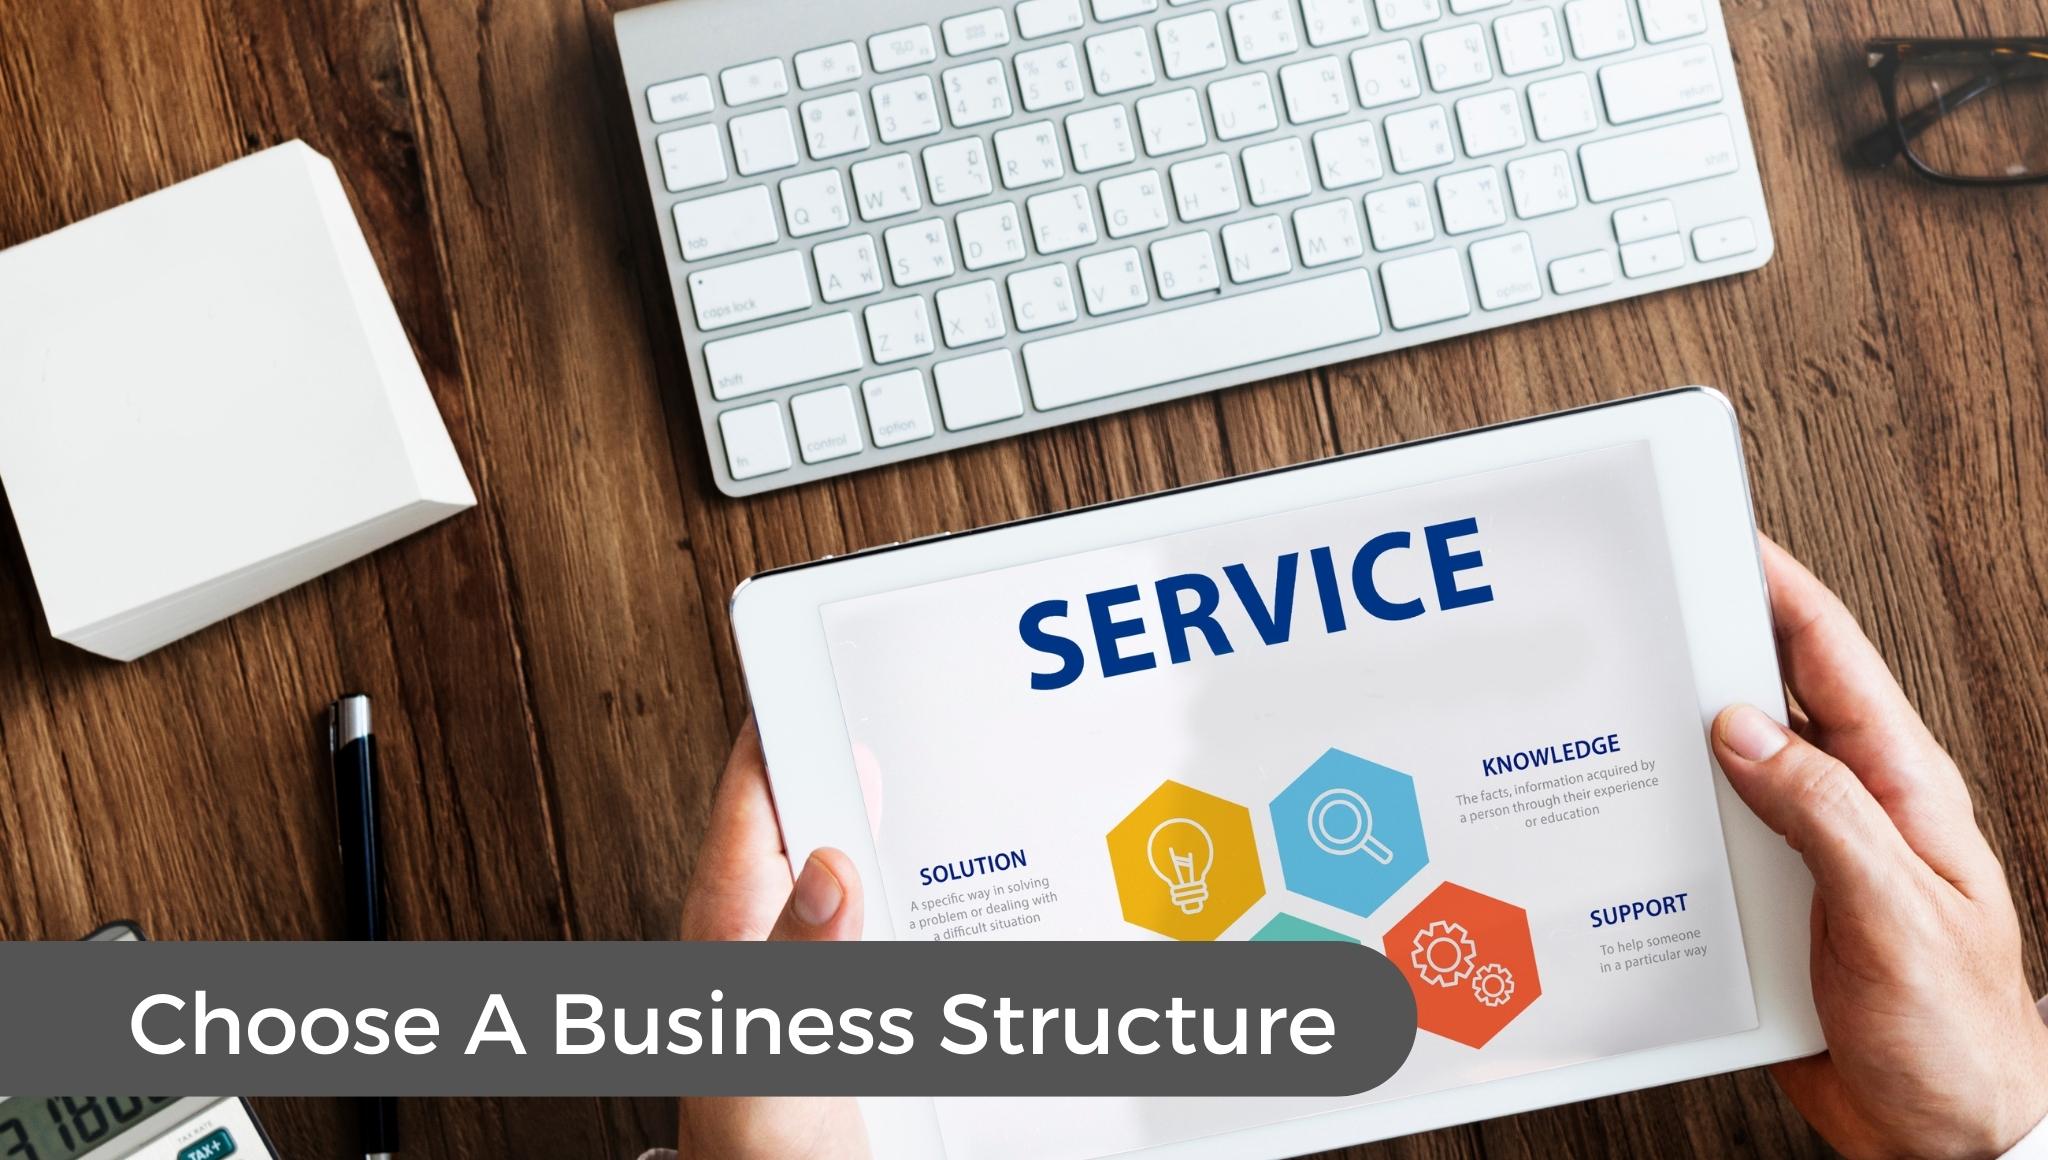 Choose a business structure